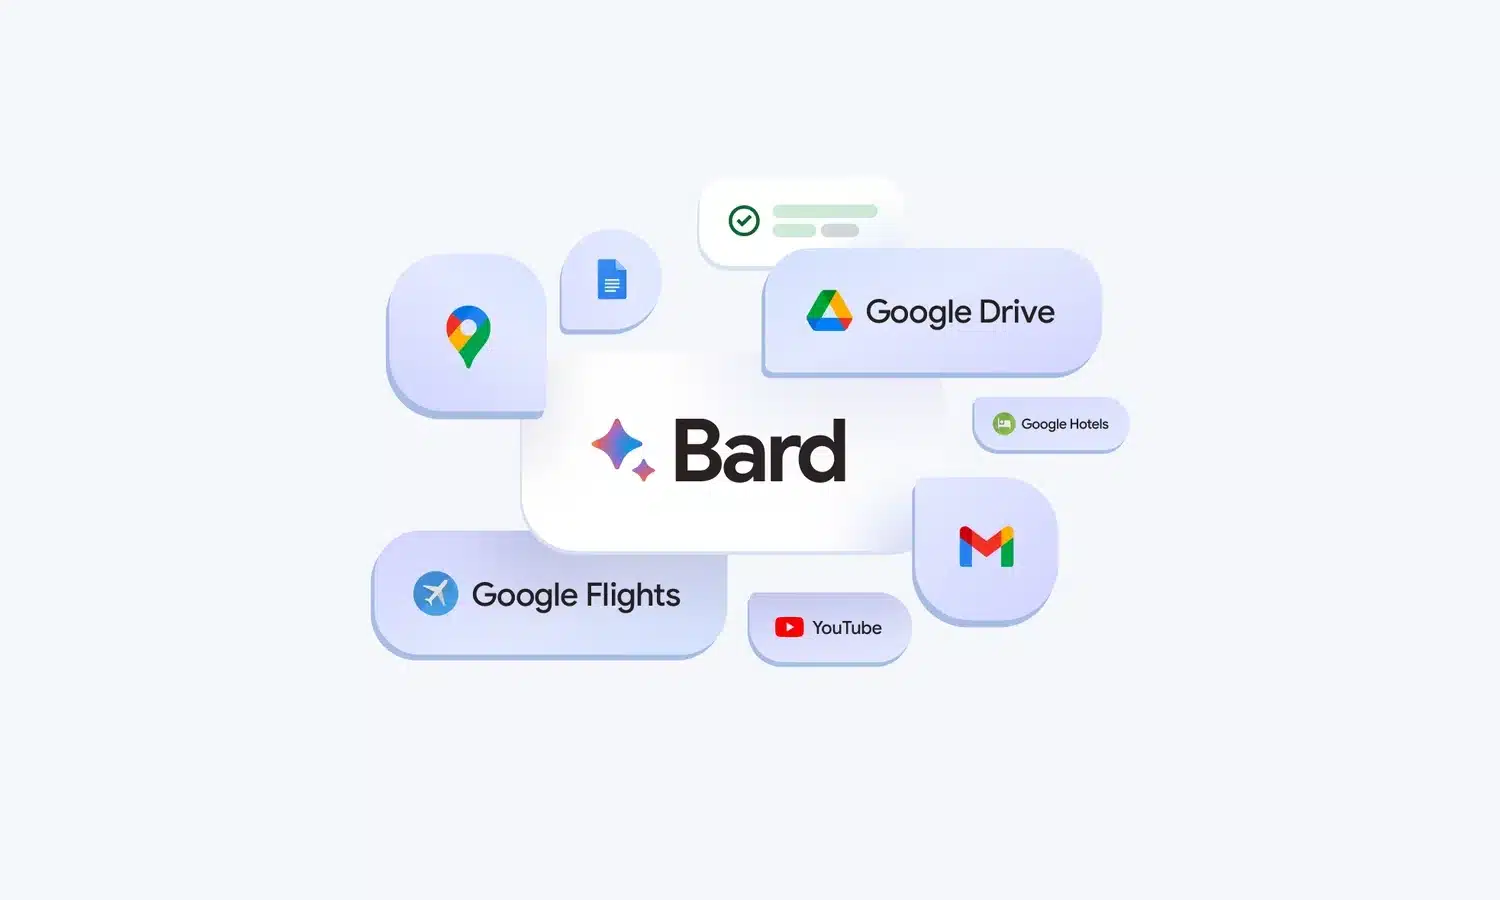 With the launch of Bard Extensions, Google brings AI to many more of its products and services